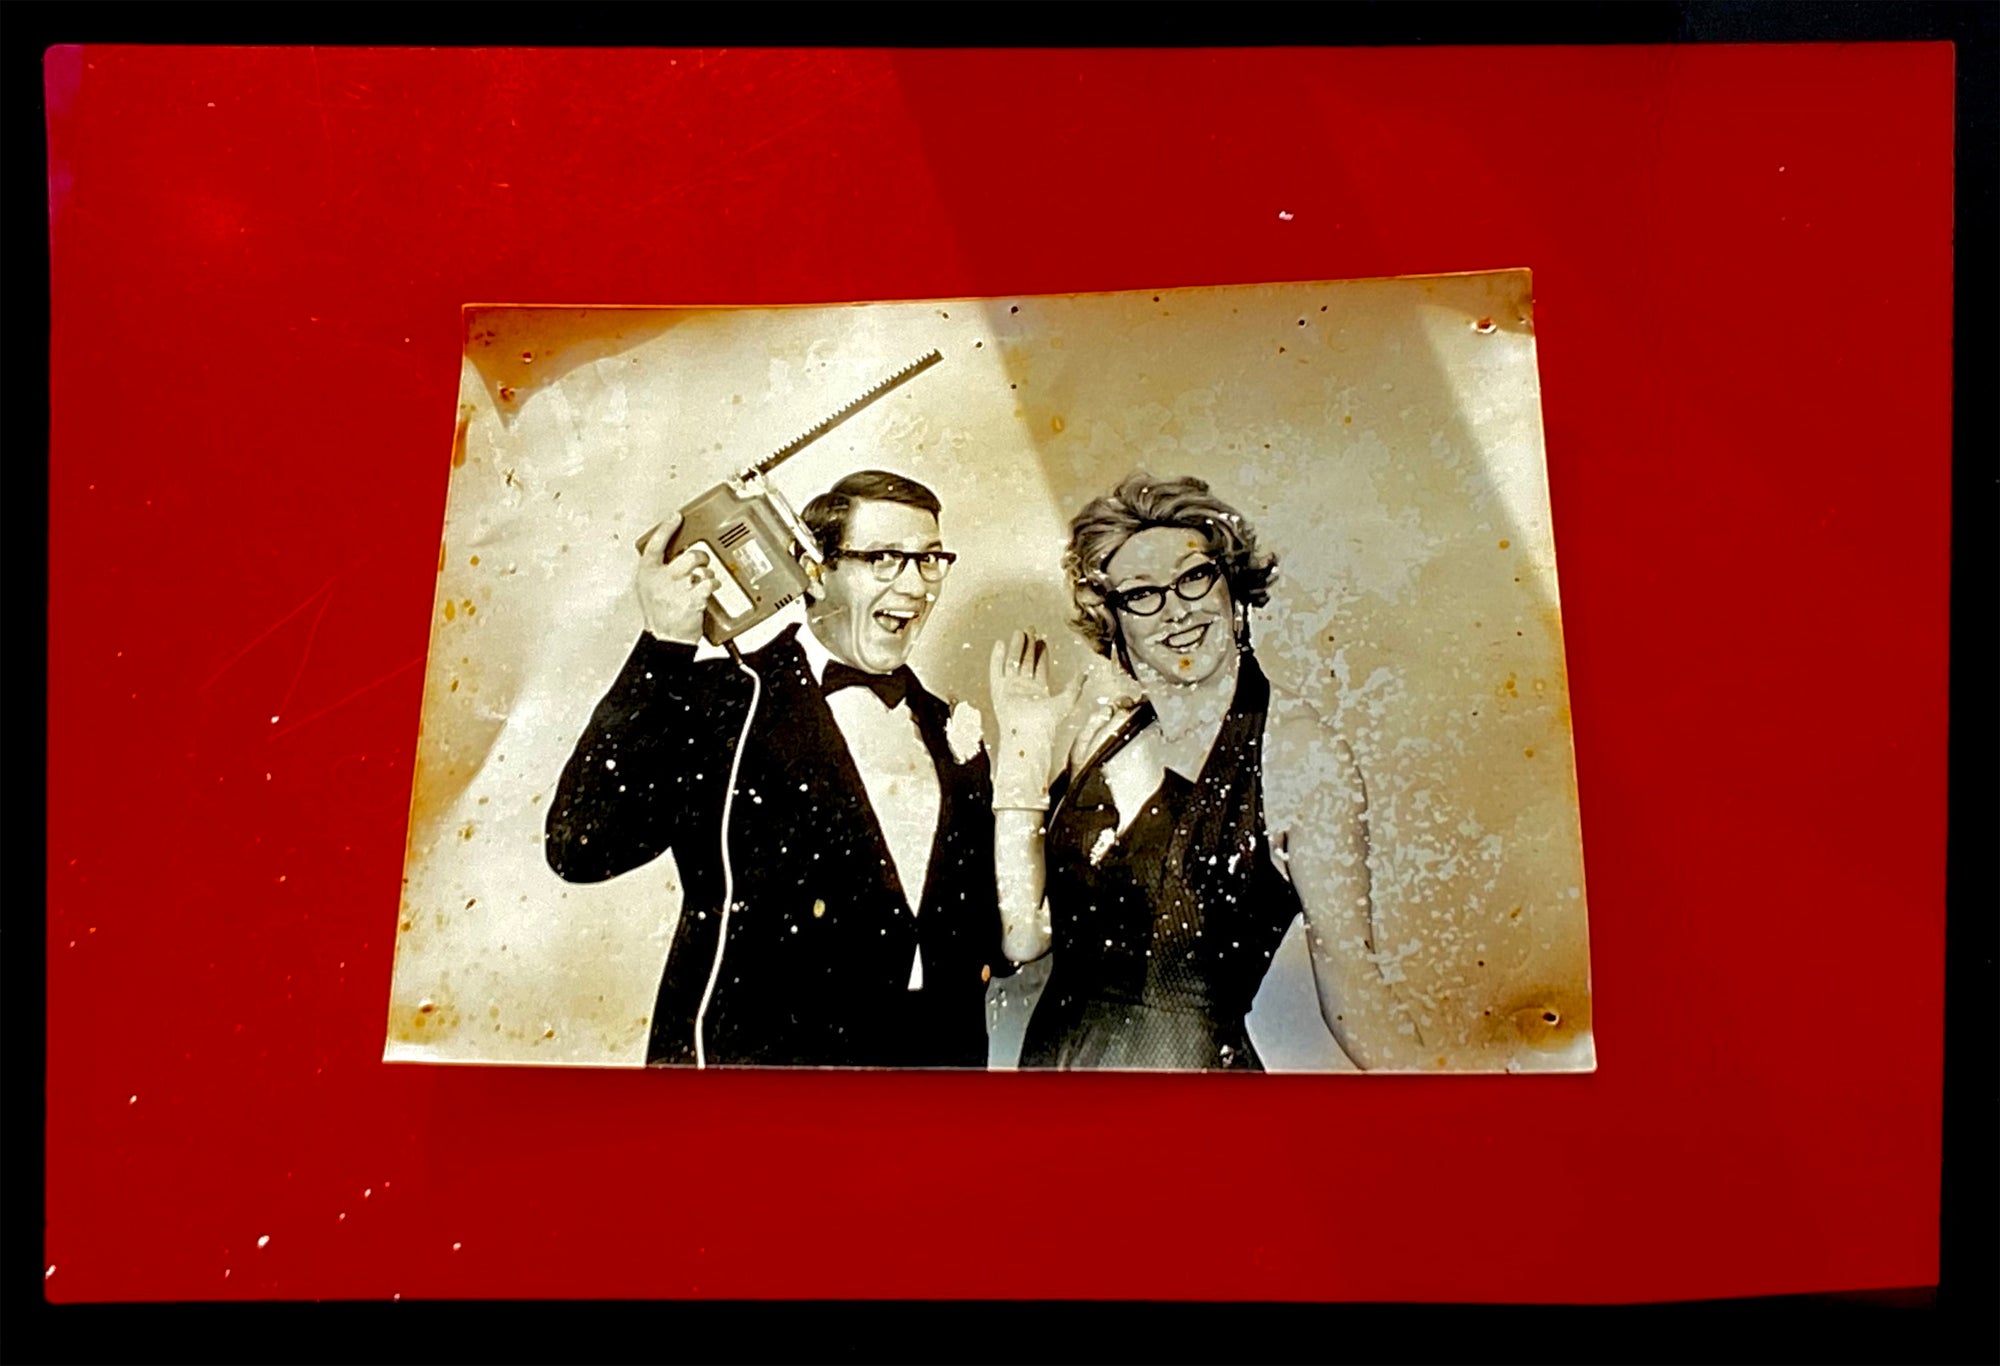 'Magic Act' is a sepia toned vintage image laid on a bright red backdrop. This photograph was captured at the Red Lodge, a stop often used by performers as they traveled across the country.